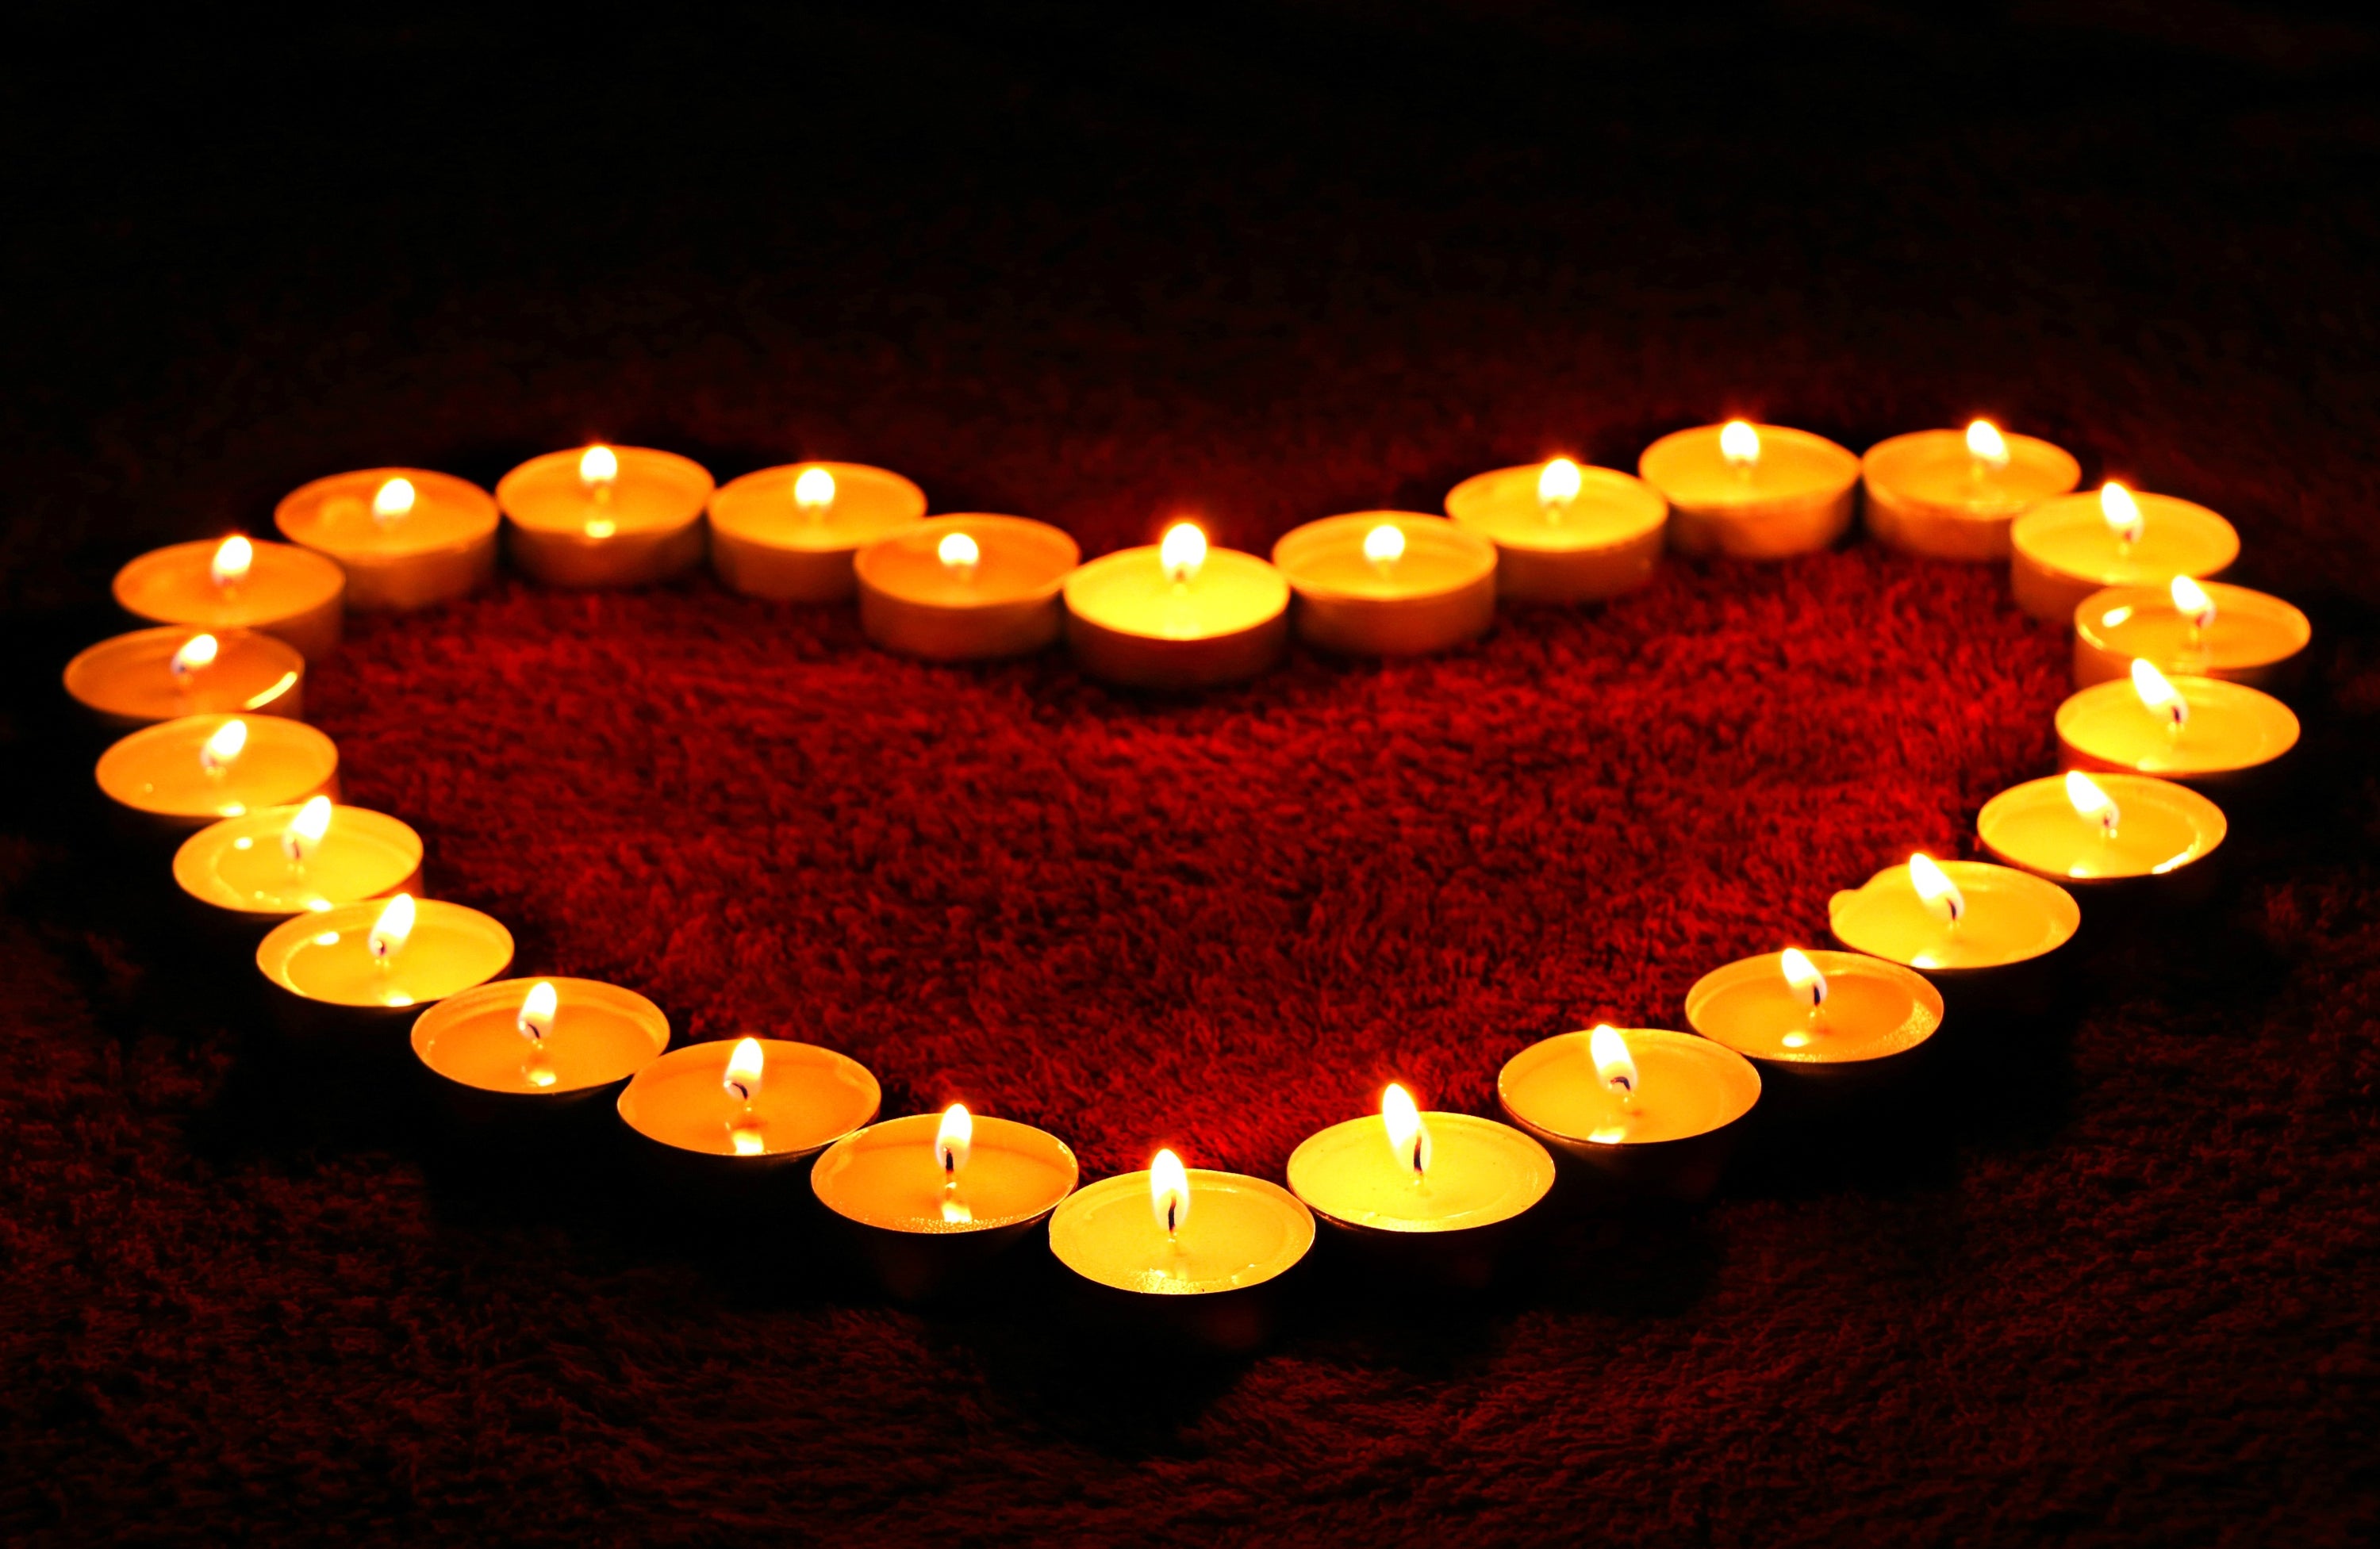 Candles portrays love